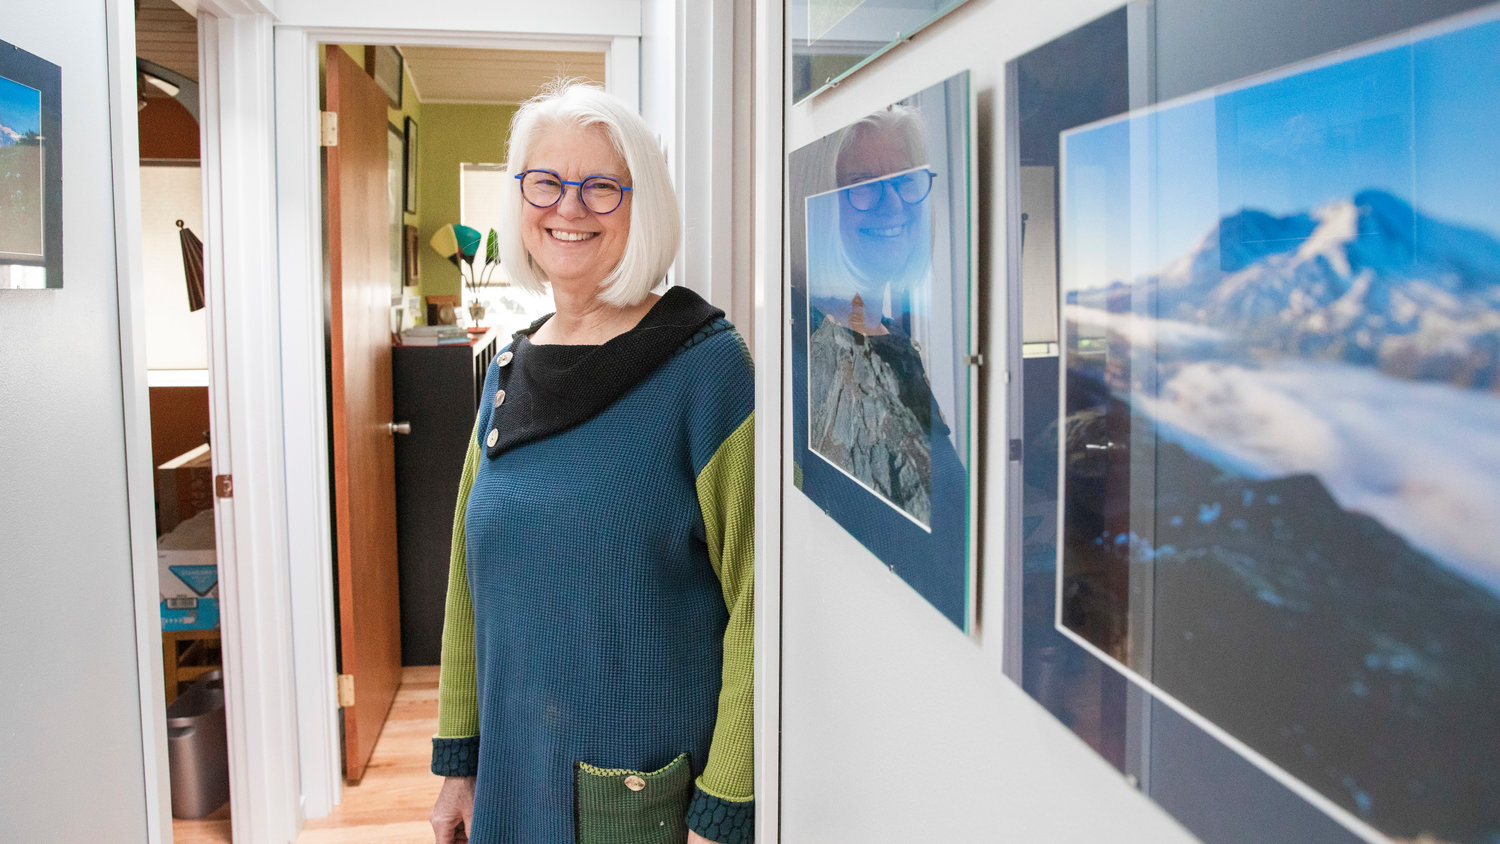 Gretchen Staebler smiles while talking about photos she’s taken on hikes that hang on display at her residence off Seminary Hill Road in Centralia.